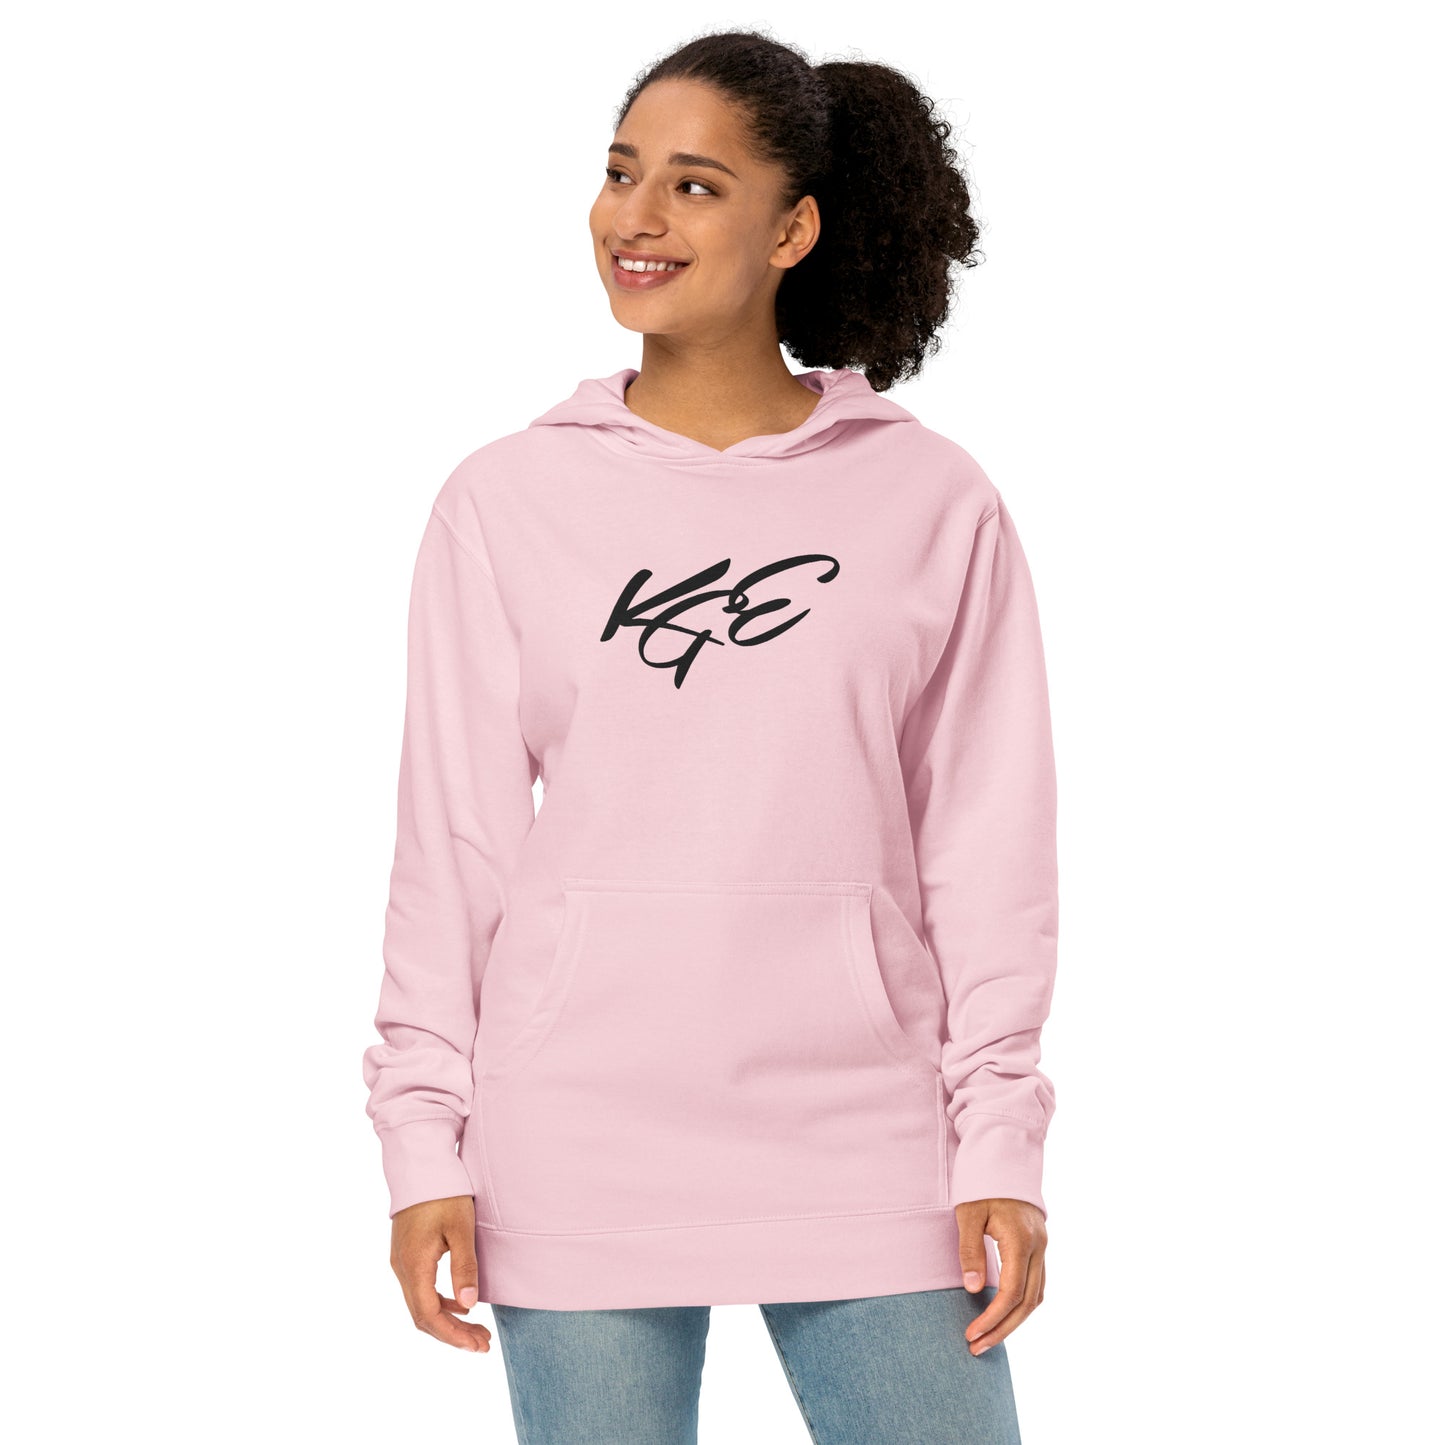 KGE Unlid large embroidery | Unisex midweight Independent hoodie